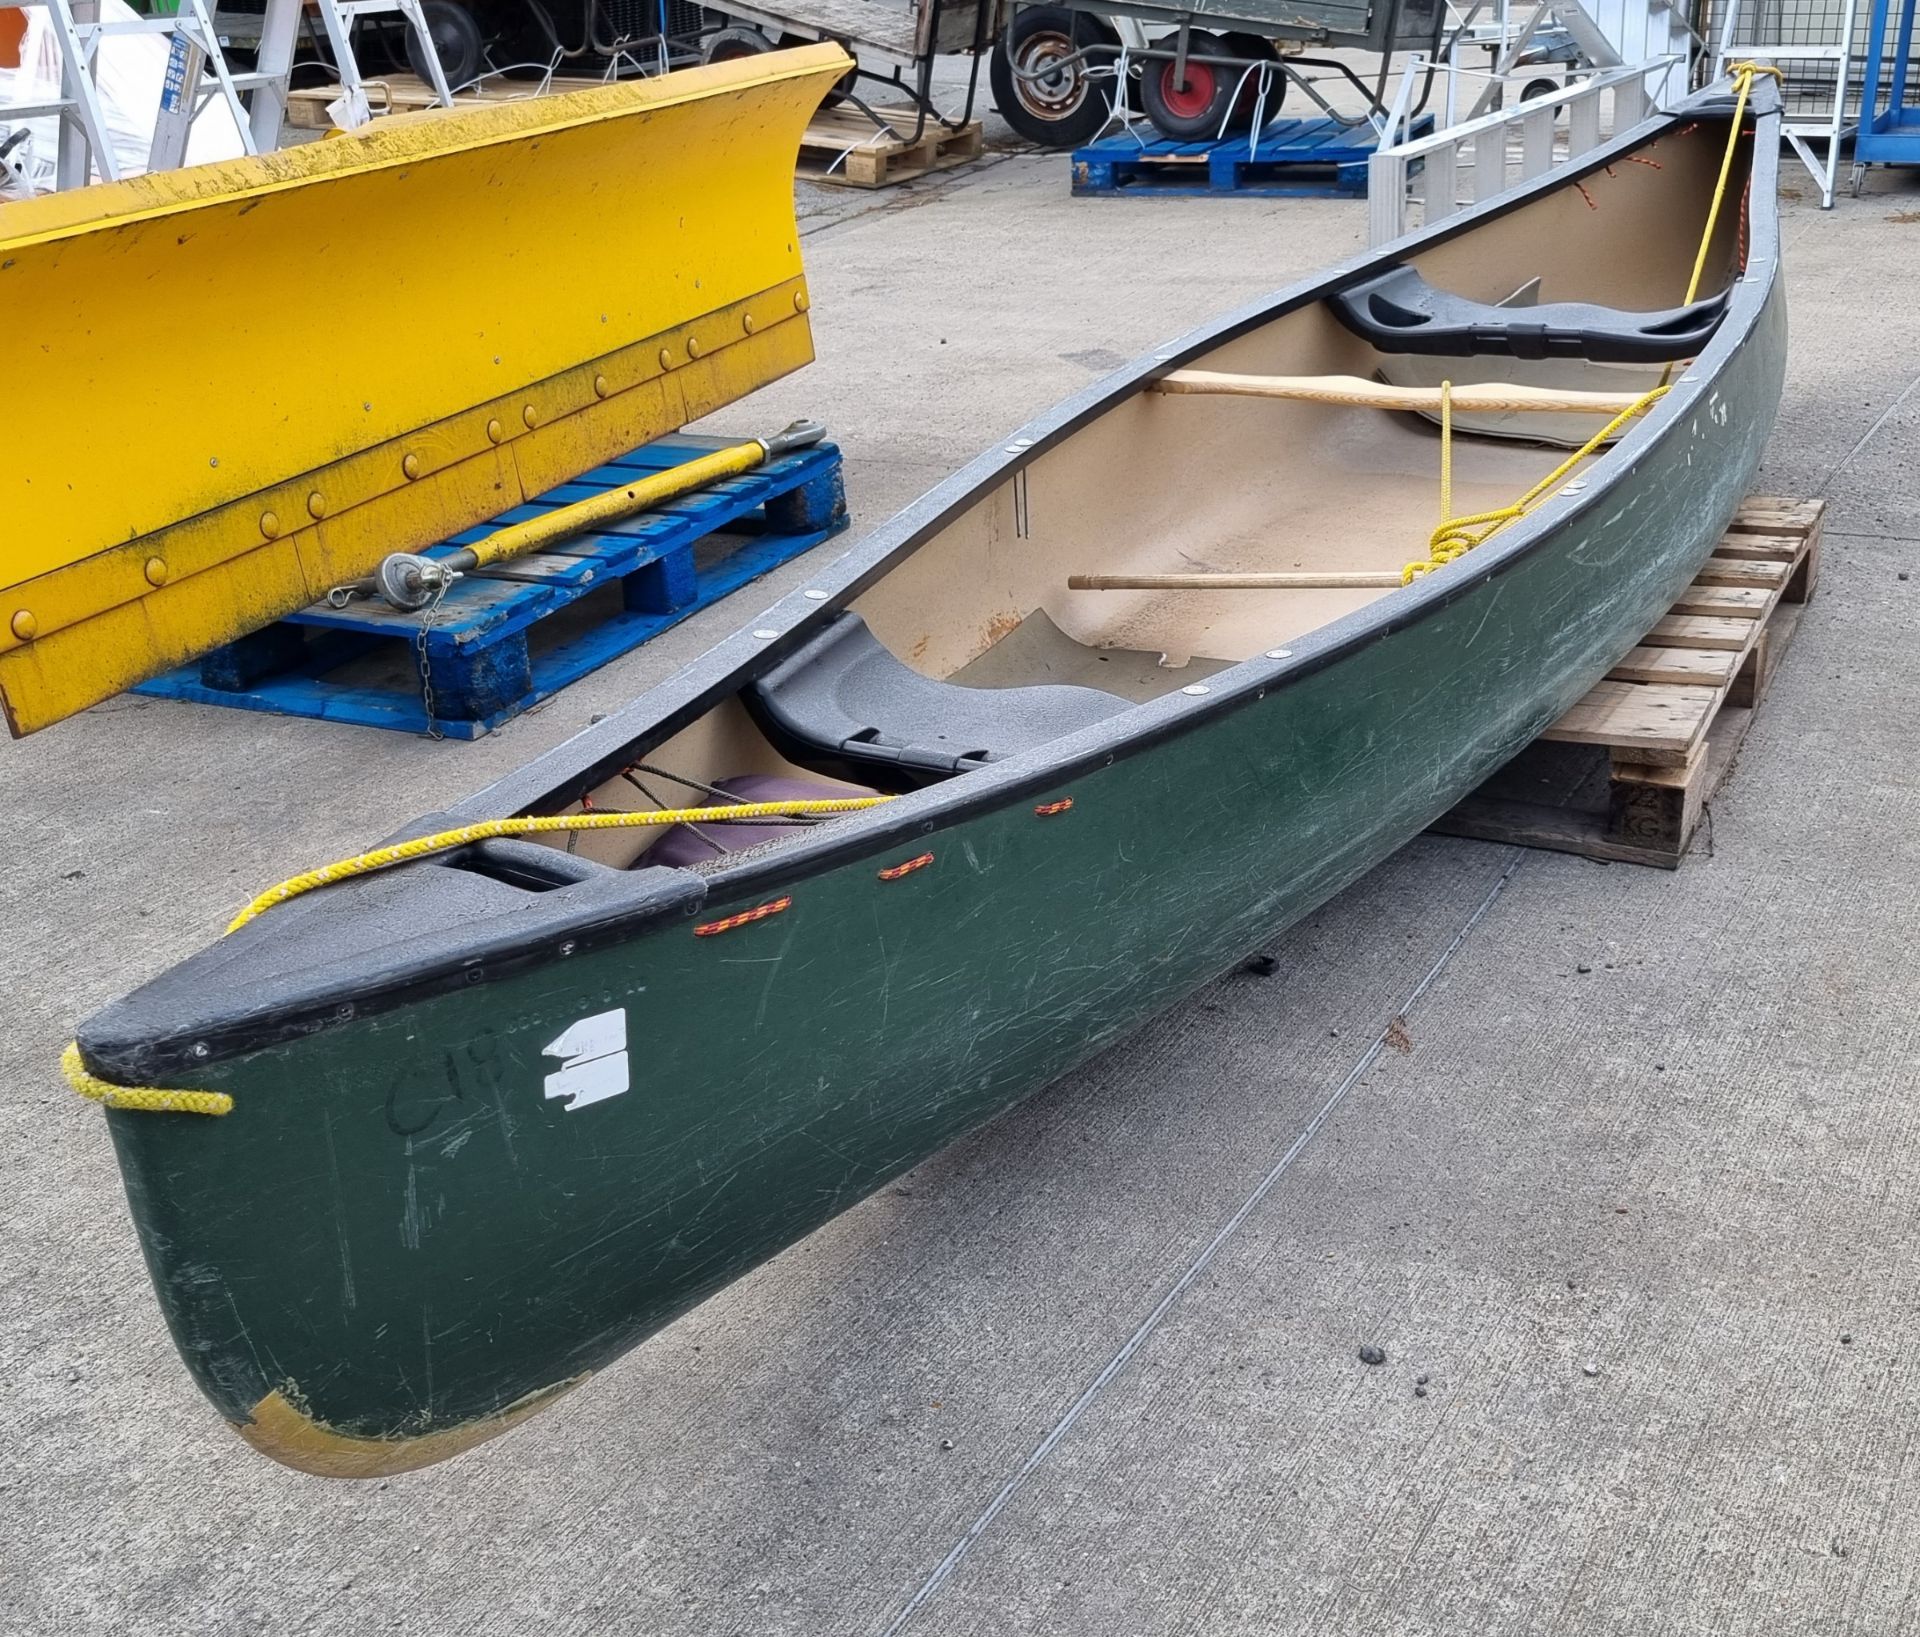 Discovery 158 green canoe - L 490 x W 100 x H 45 cm - Image 6 of 6